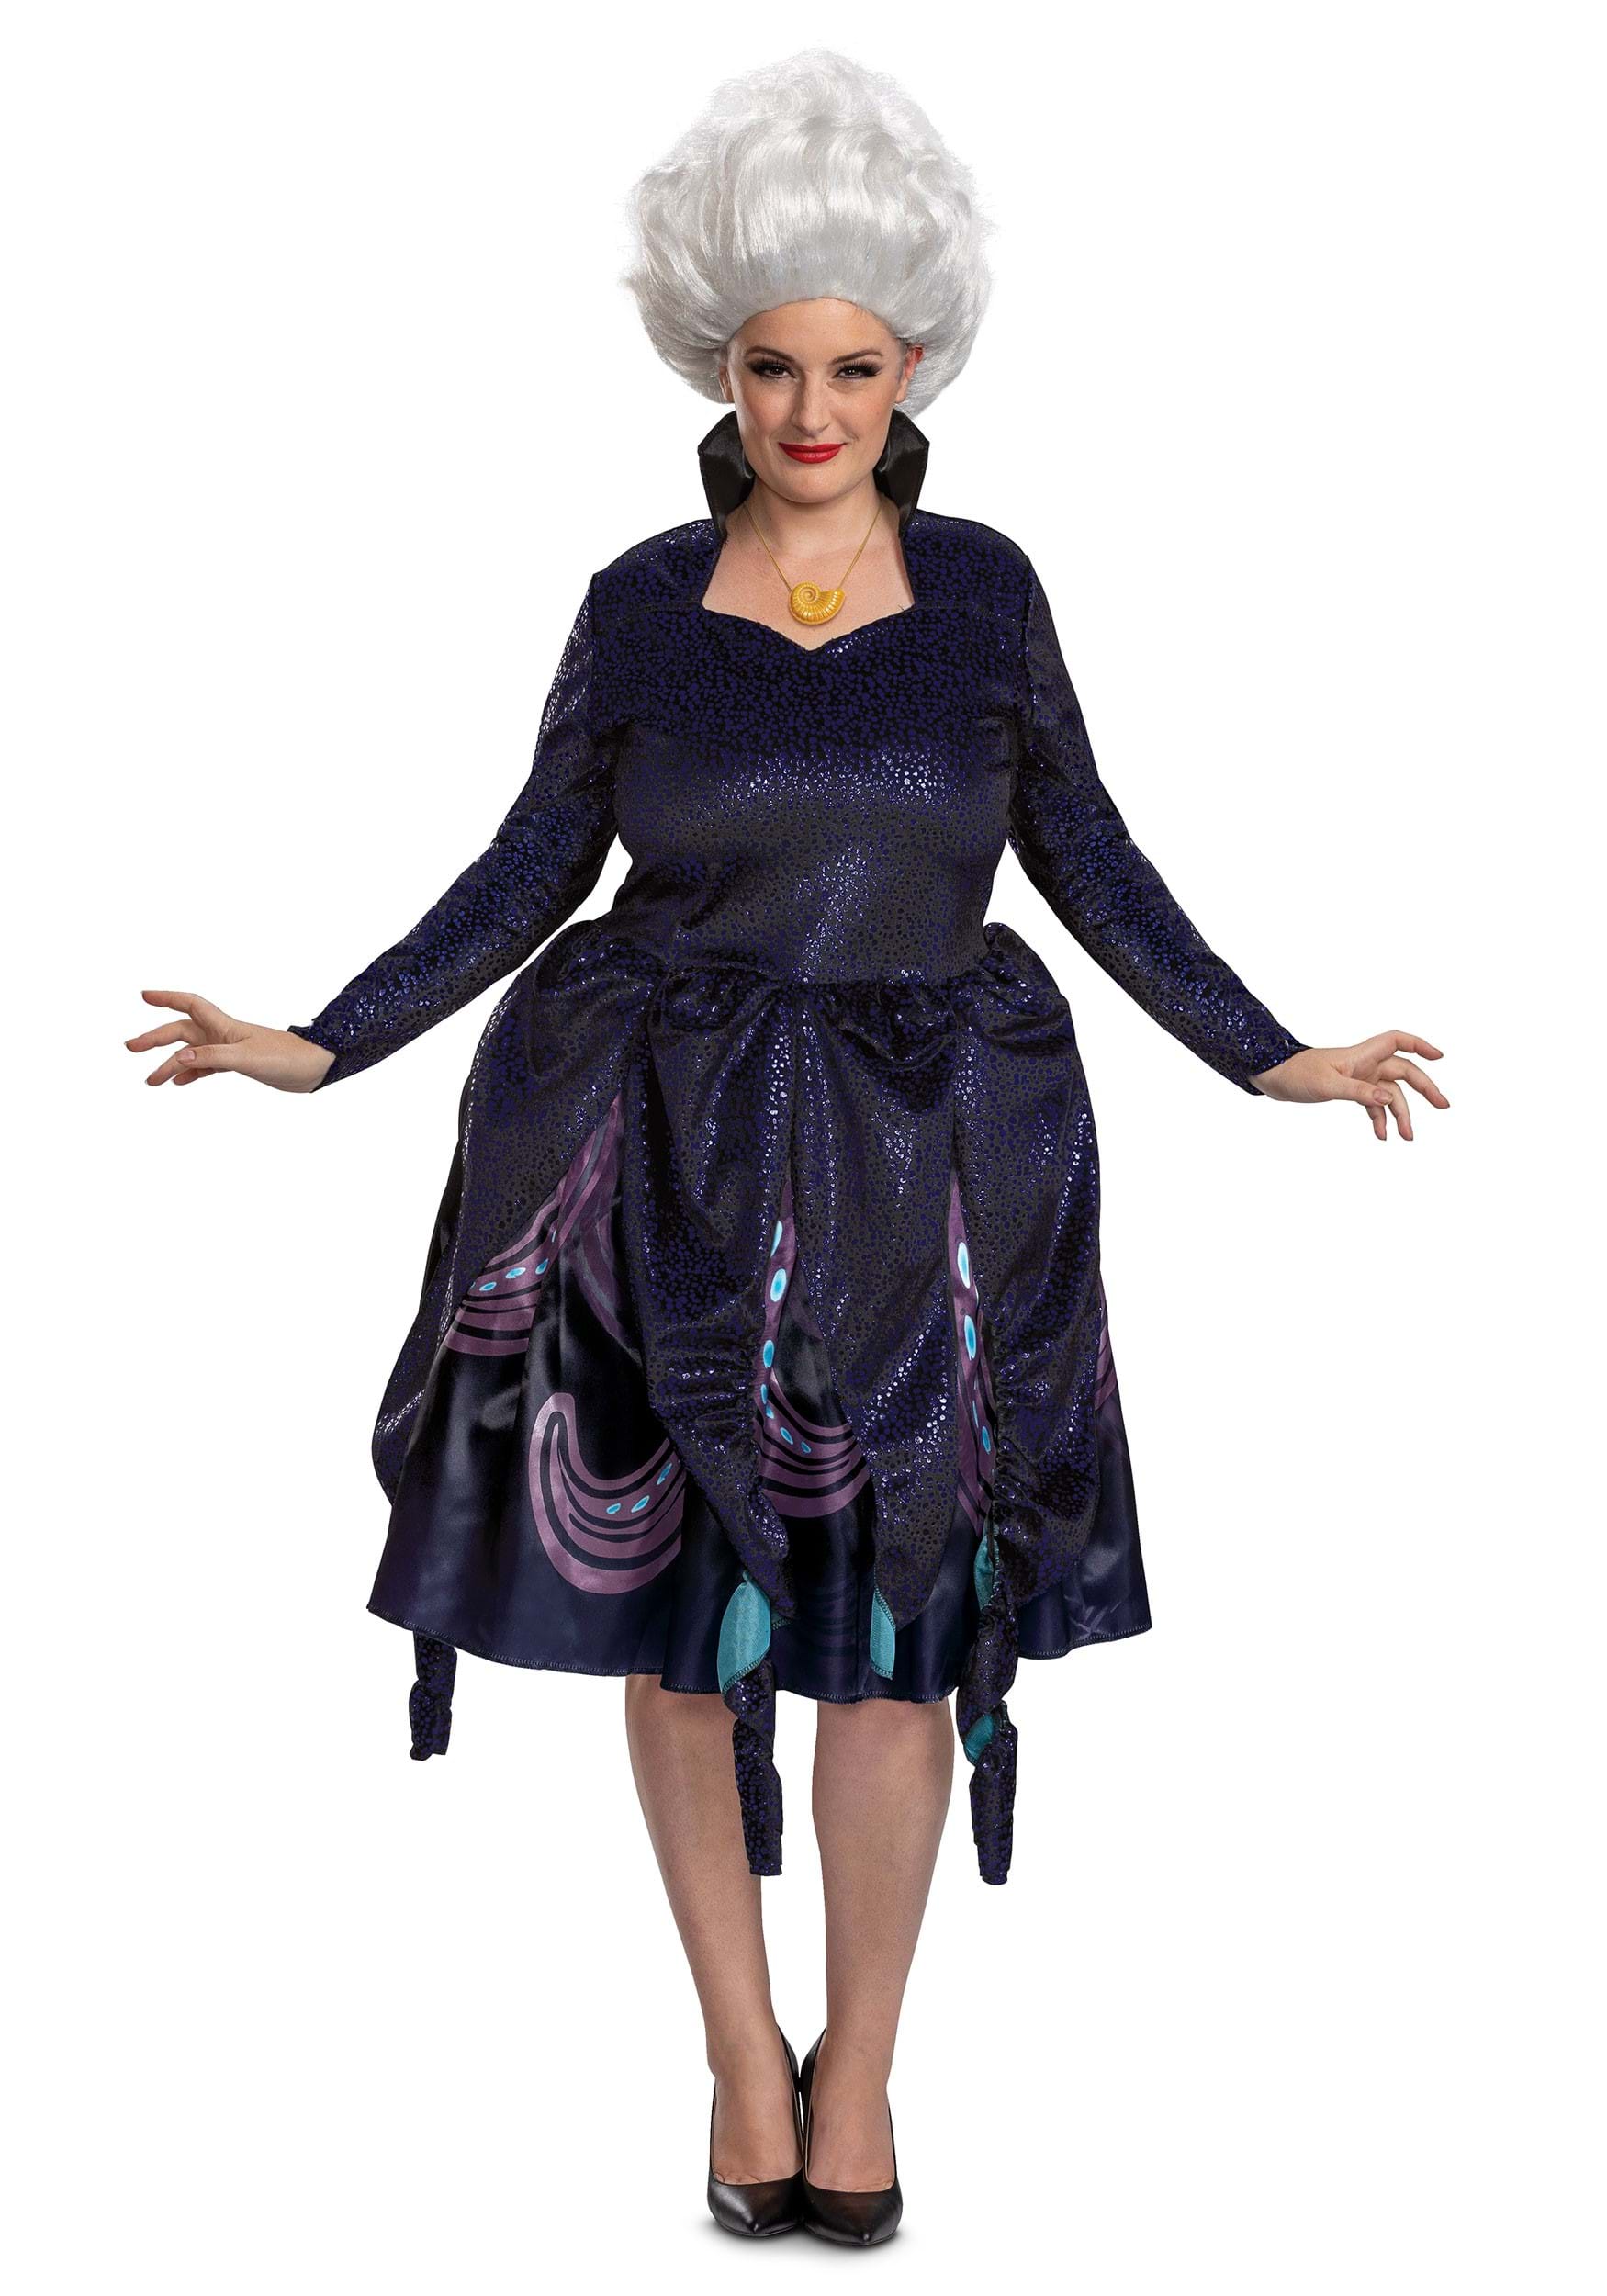 Image of Adult Little Mermaid Live Action Deluxe Ursula Costume ID DI125629-L